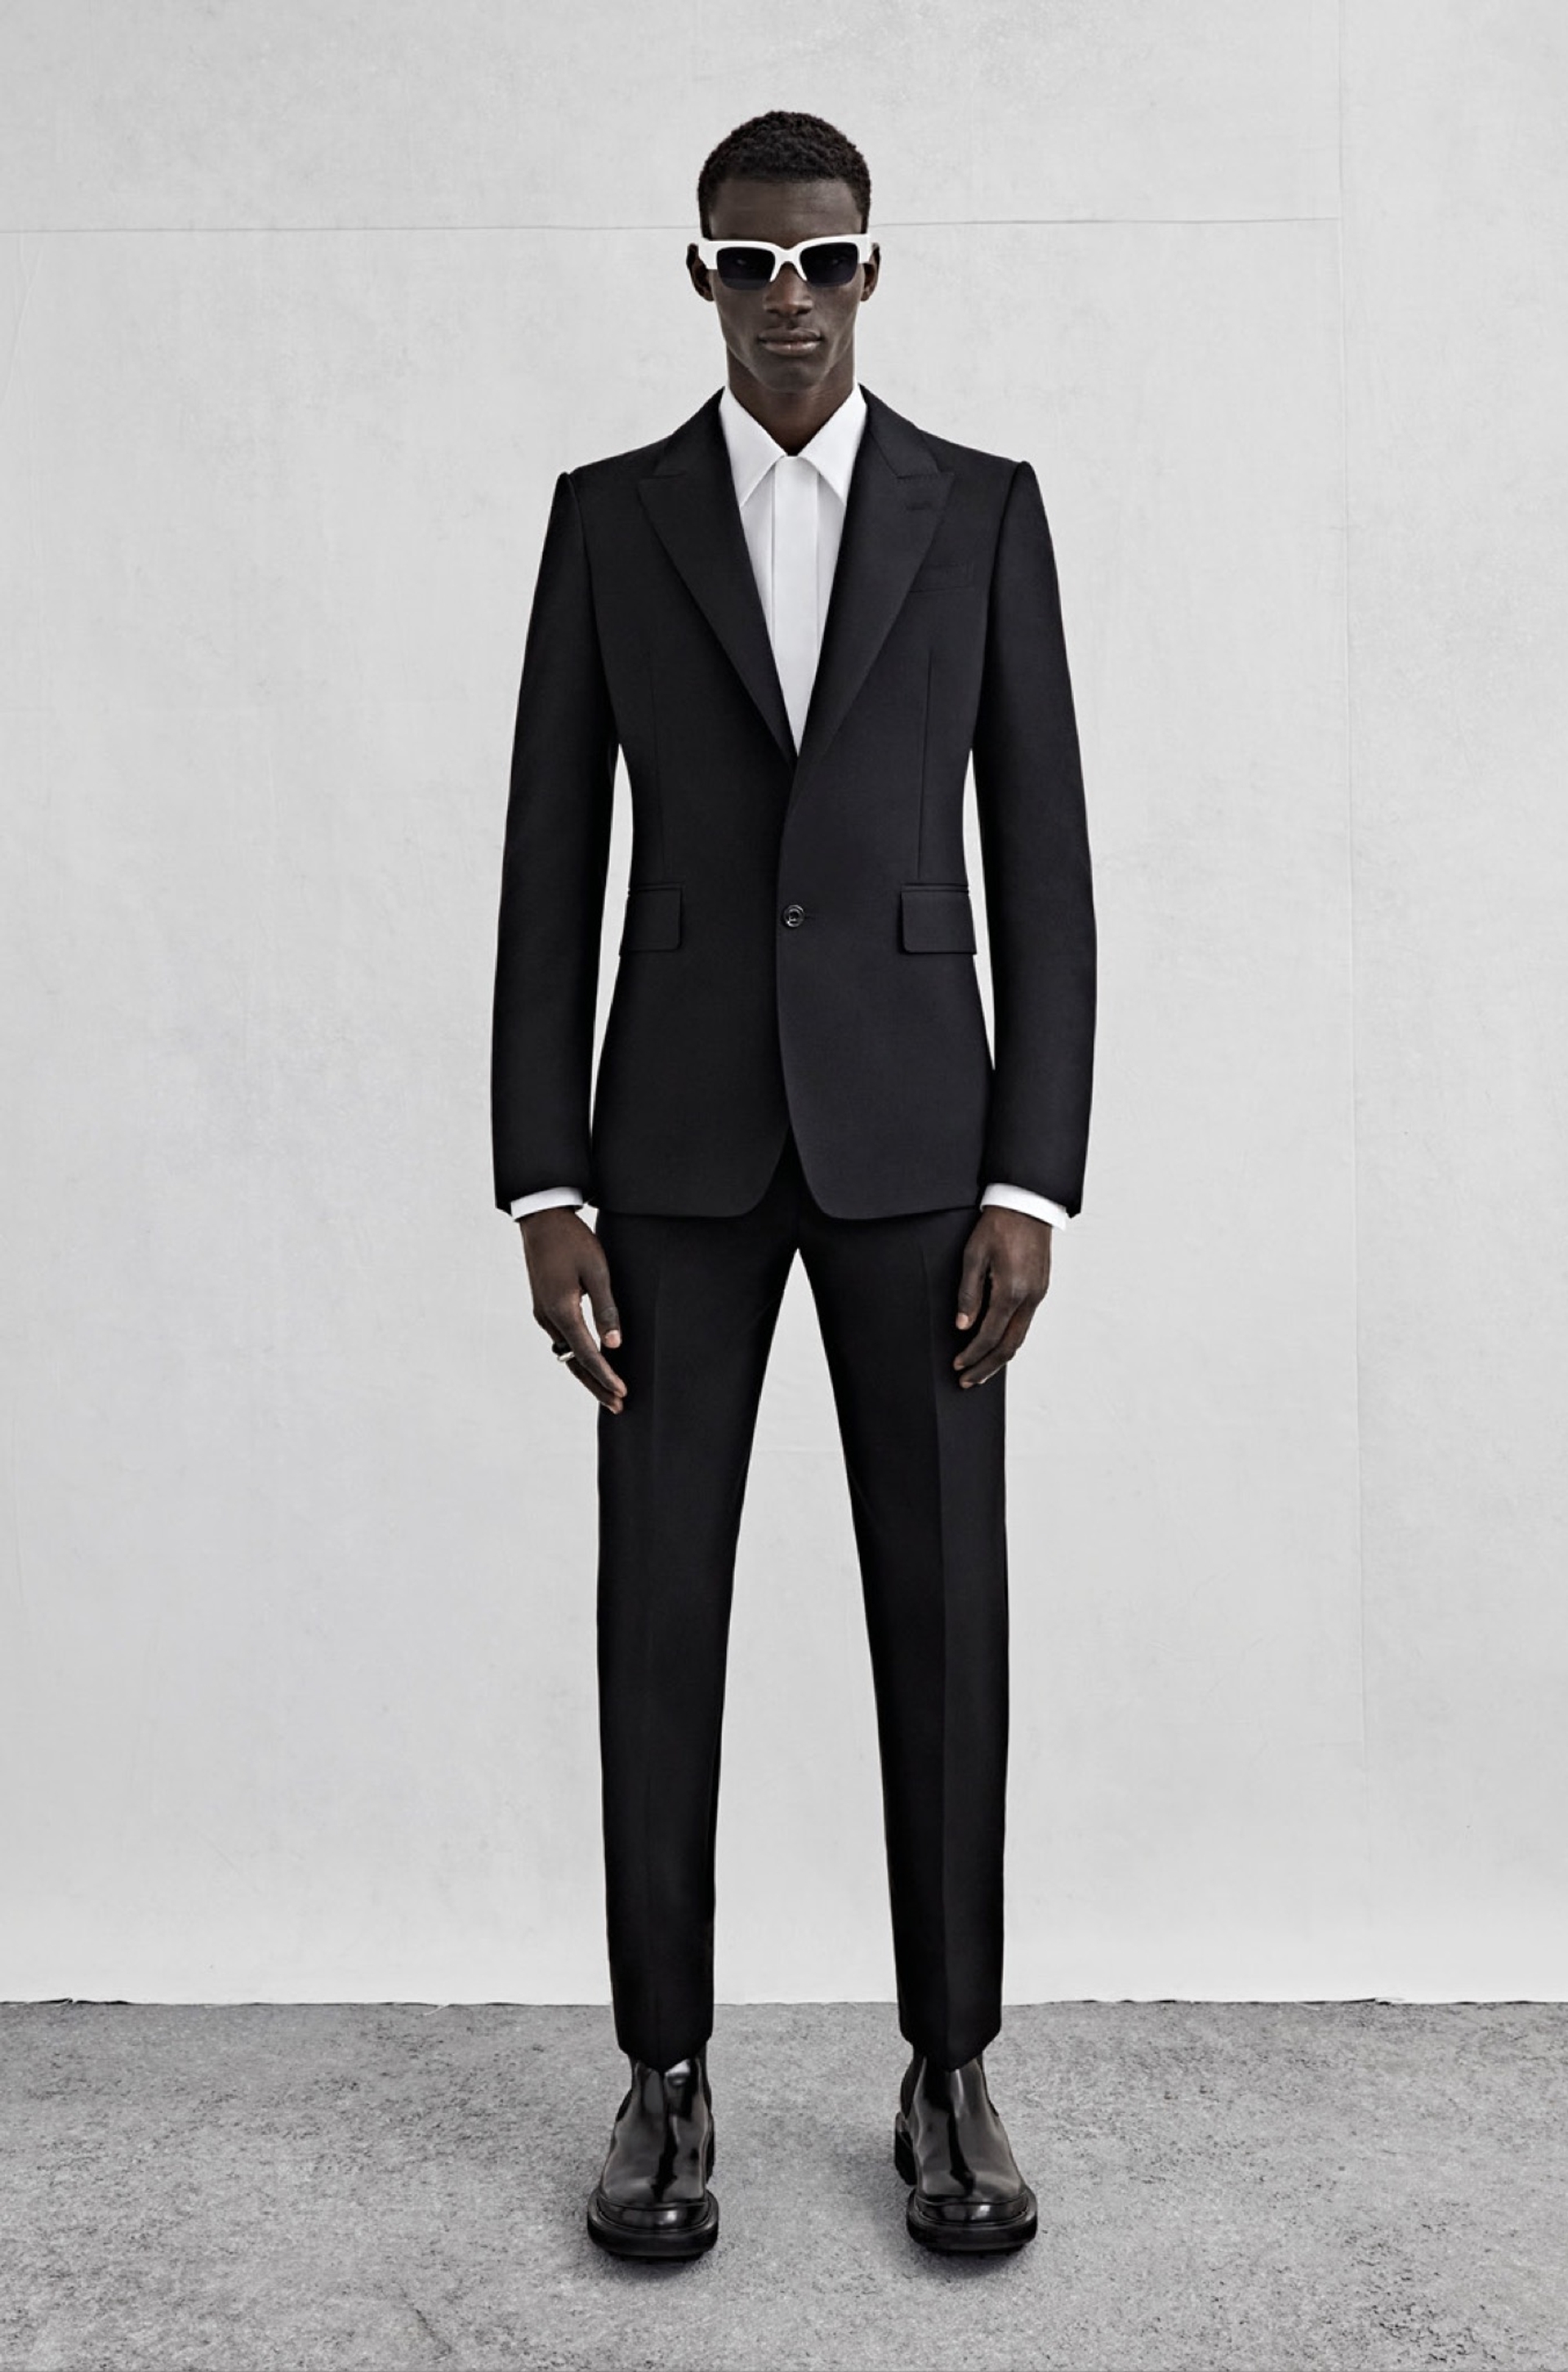 A single-breasted tailored jacket in black wool gabardine, a shirt in white cotton poplin and cigarette trousers in black wool gabardine.